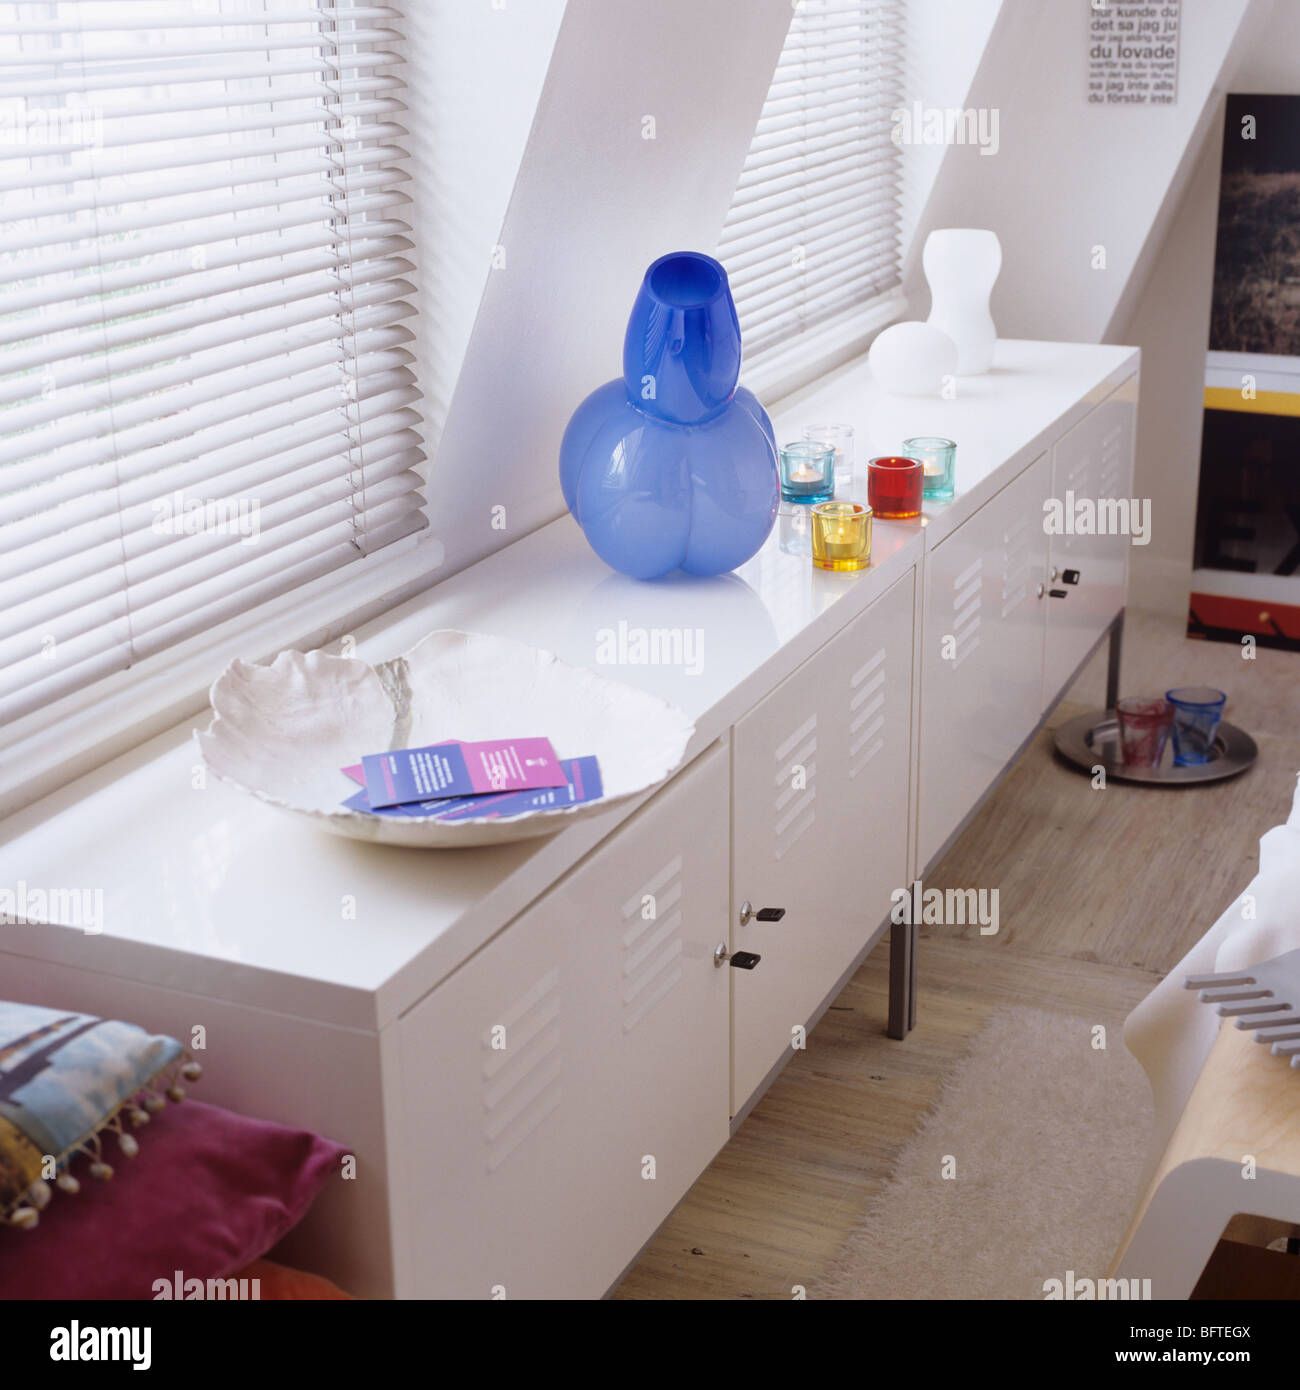 Modern designer storage cabinet beneath windows with blinds in a contemporary apartment/ flat. Stock Photo